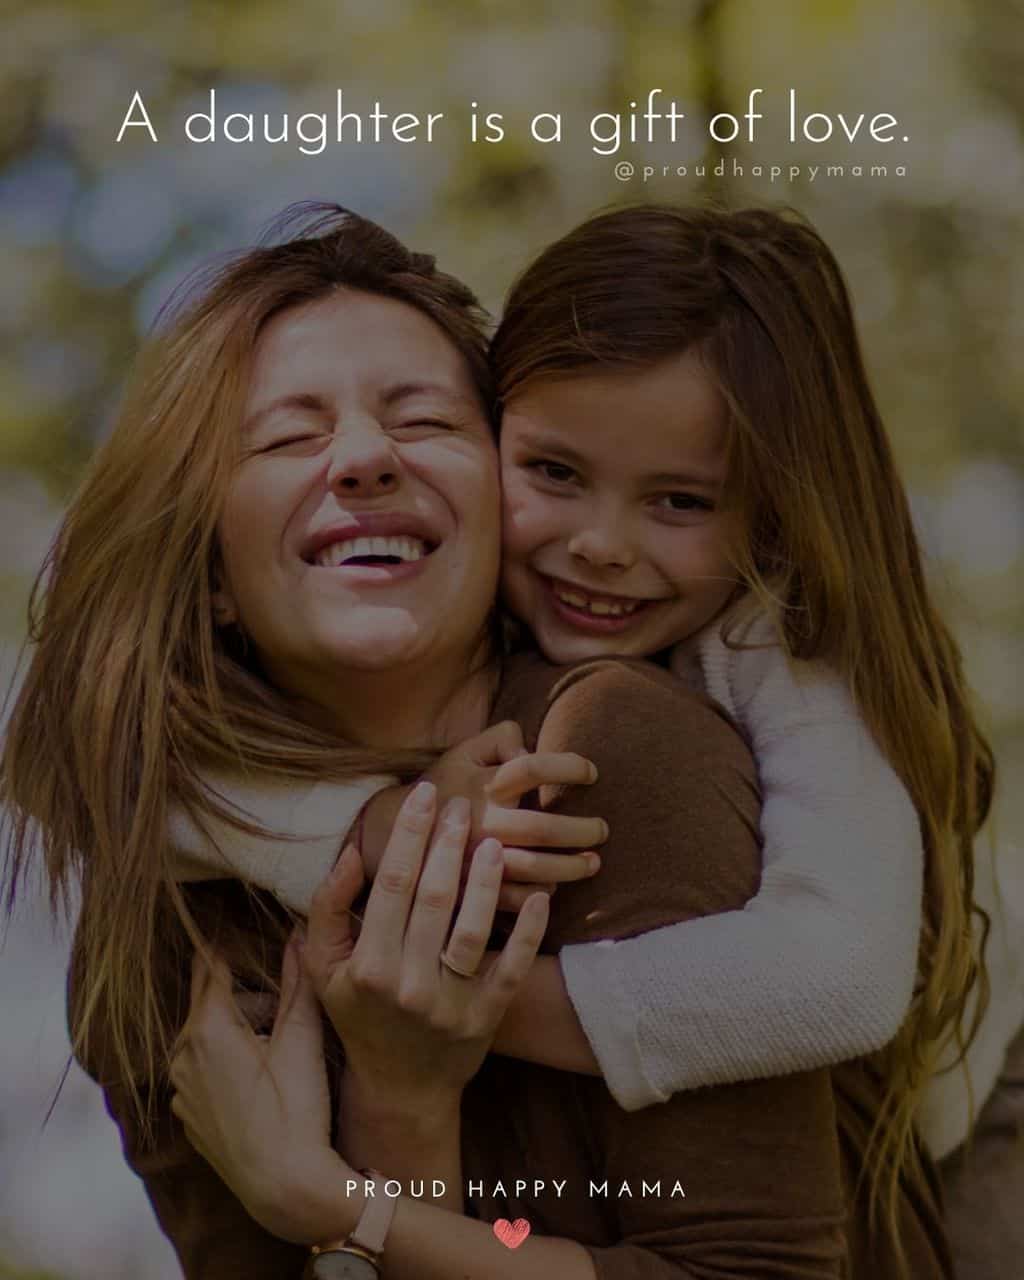 for my daughter quotes - ‘A daughter is a gift of love.’